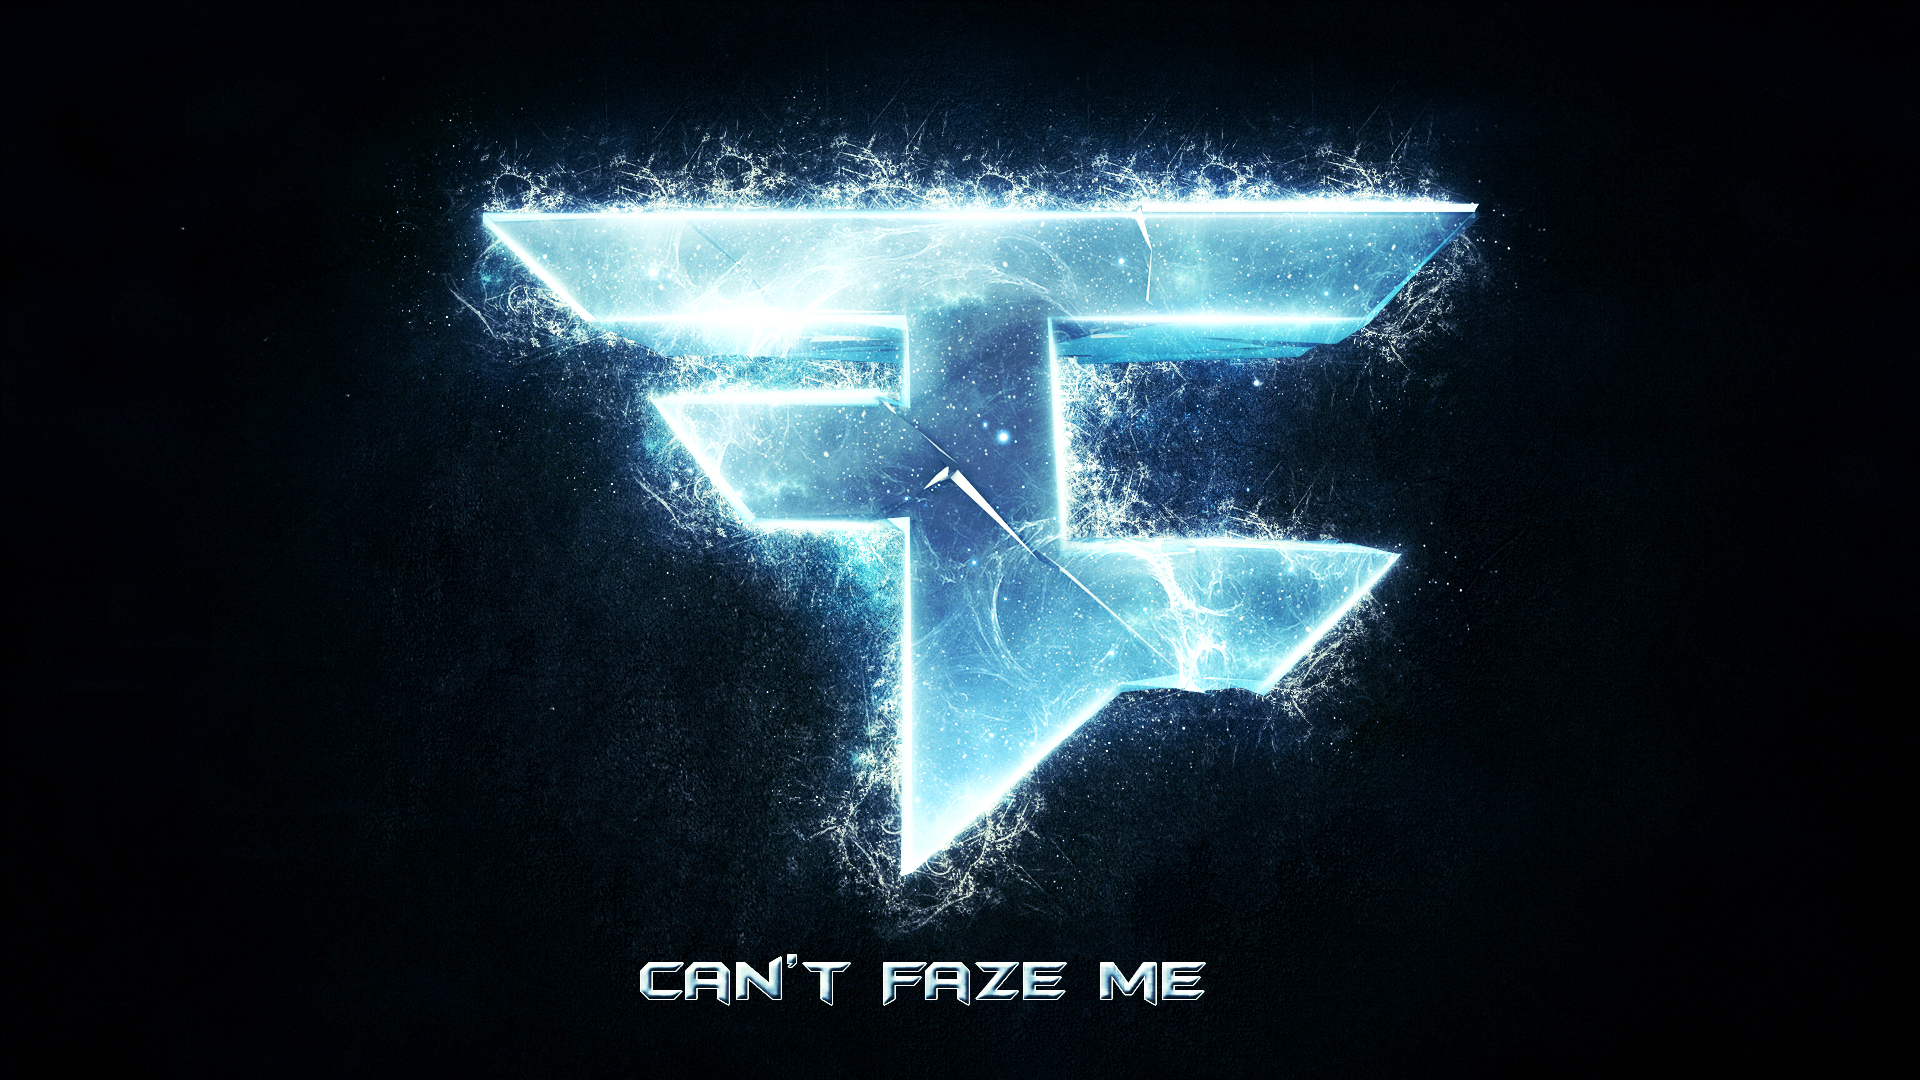  download wallpapers optic gaming displaying images for faze wallpaper